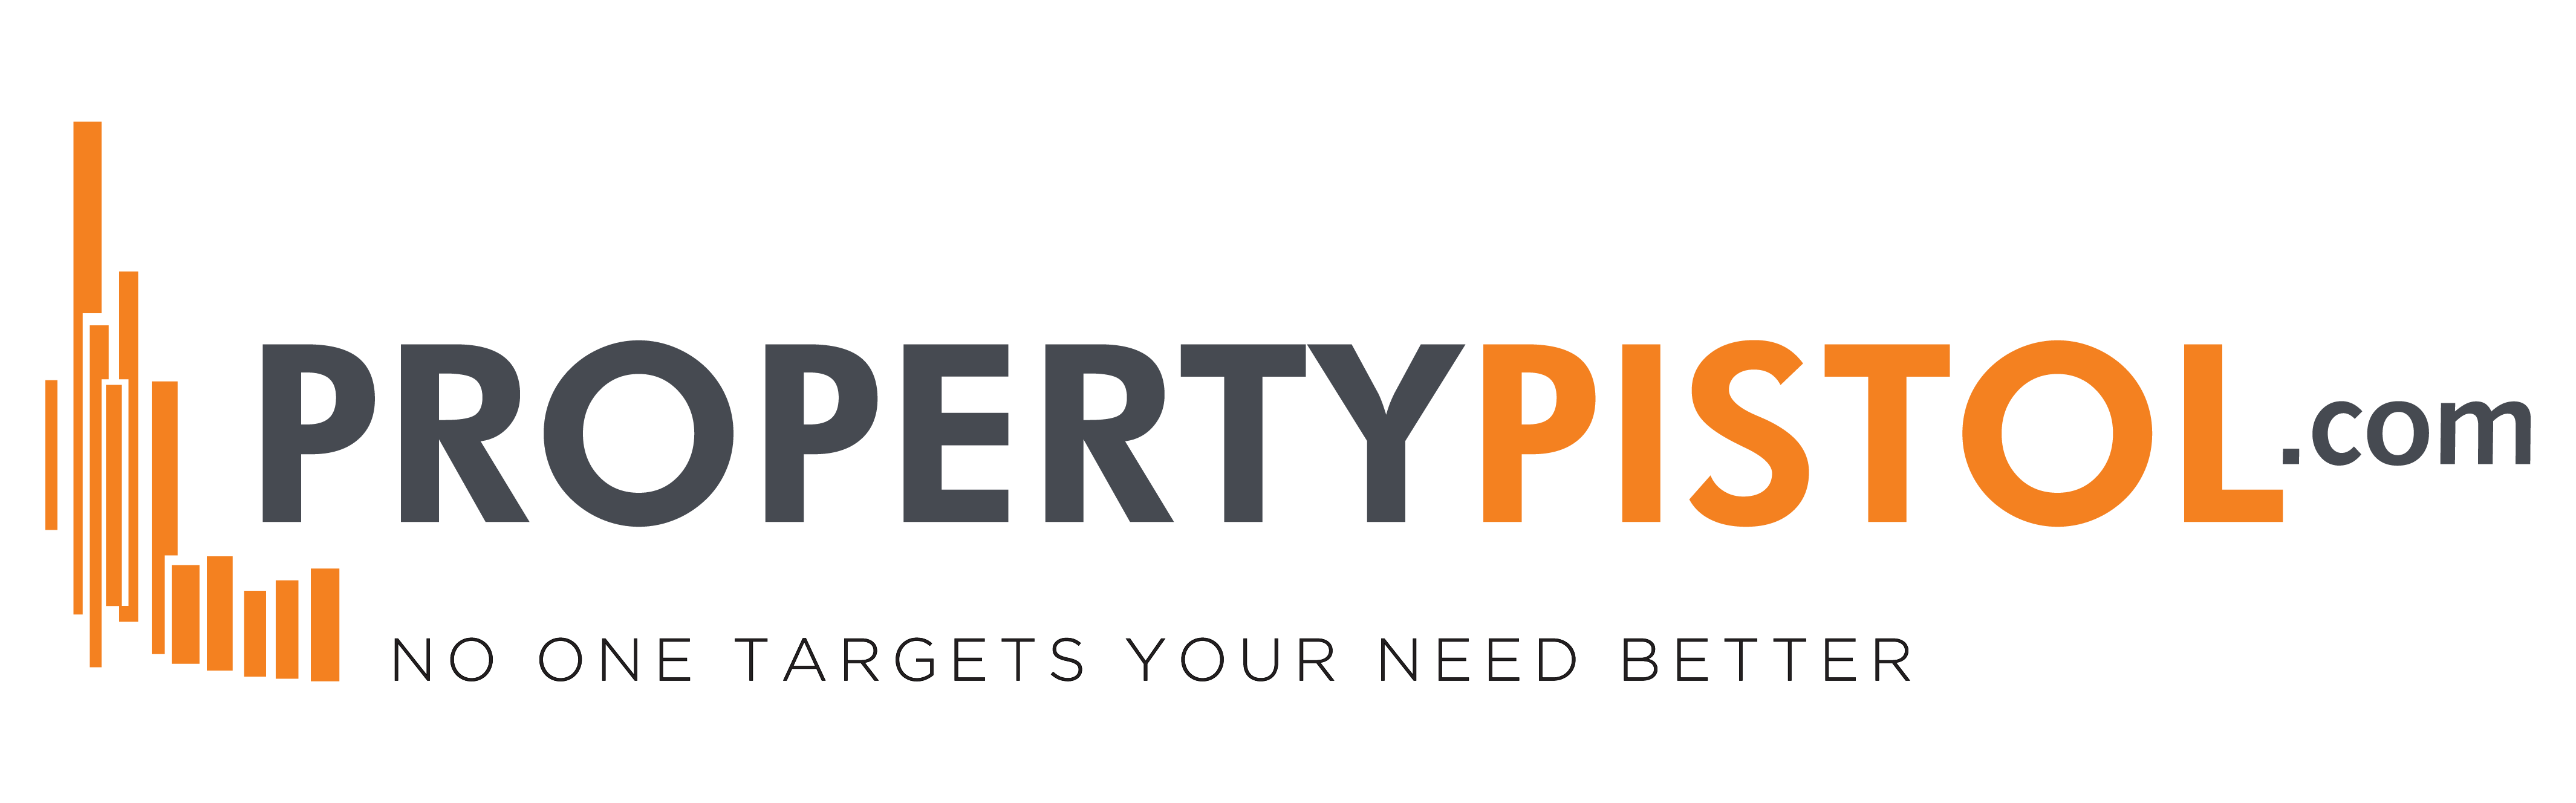 PropertyPistol, Raises Rs 45 Cr in Series A Funding